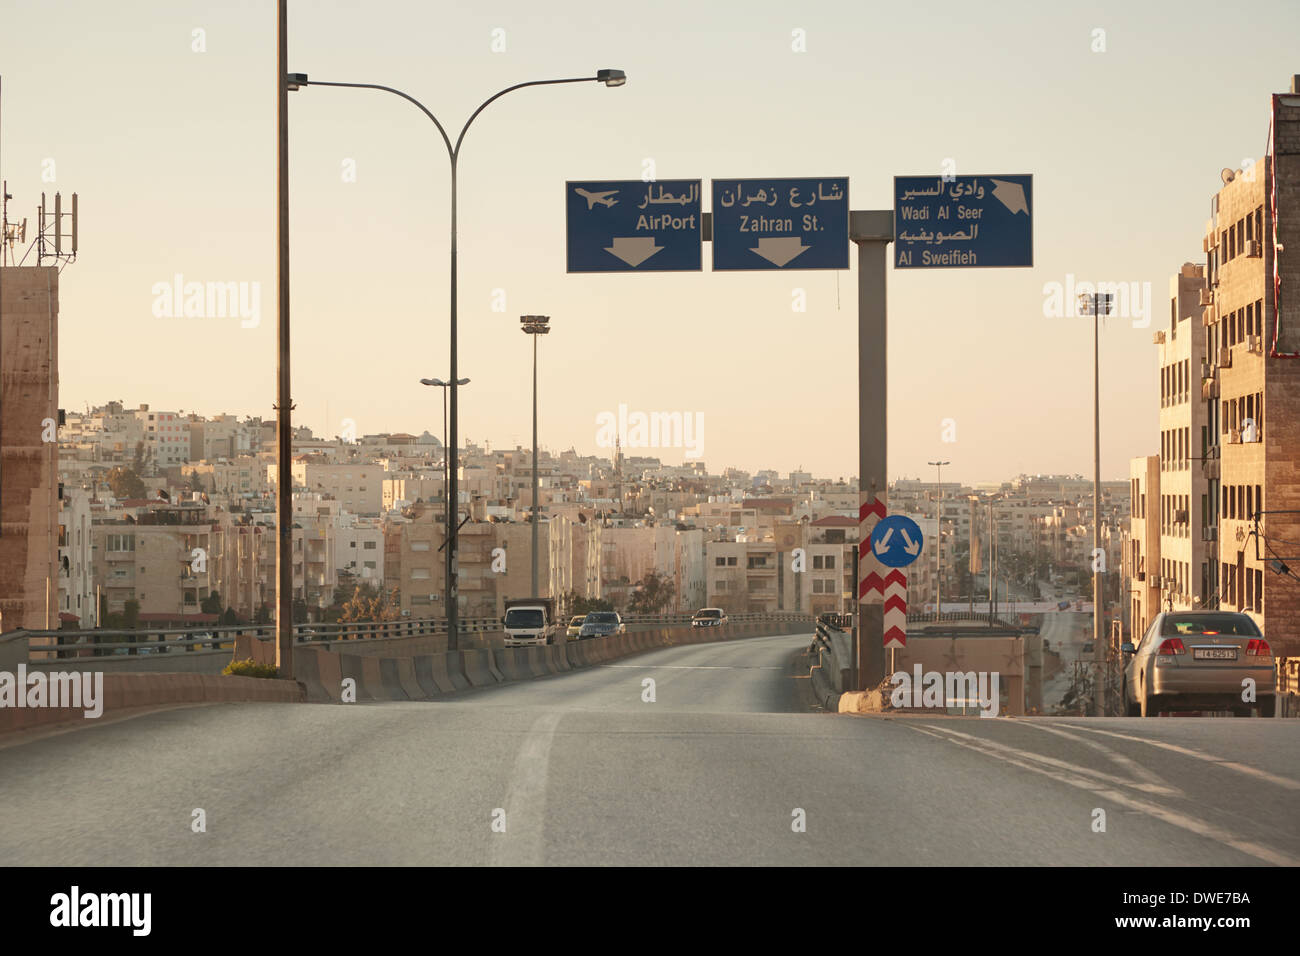 Streets in early morning in Amman, Jordan. Middle east city view Stock Photo